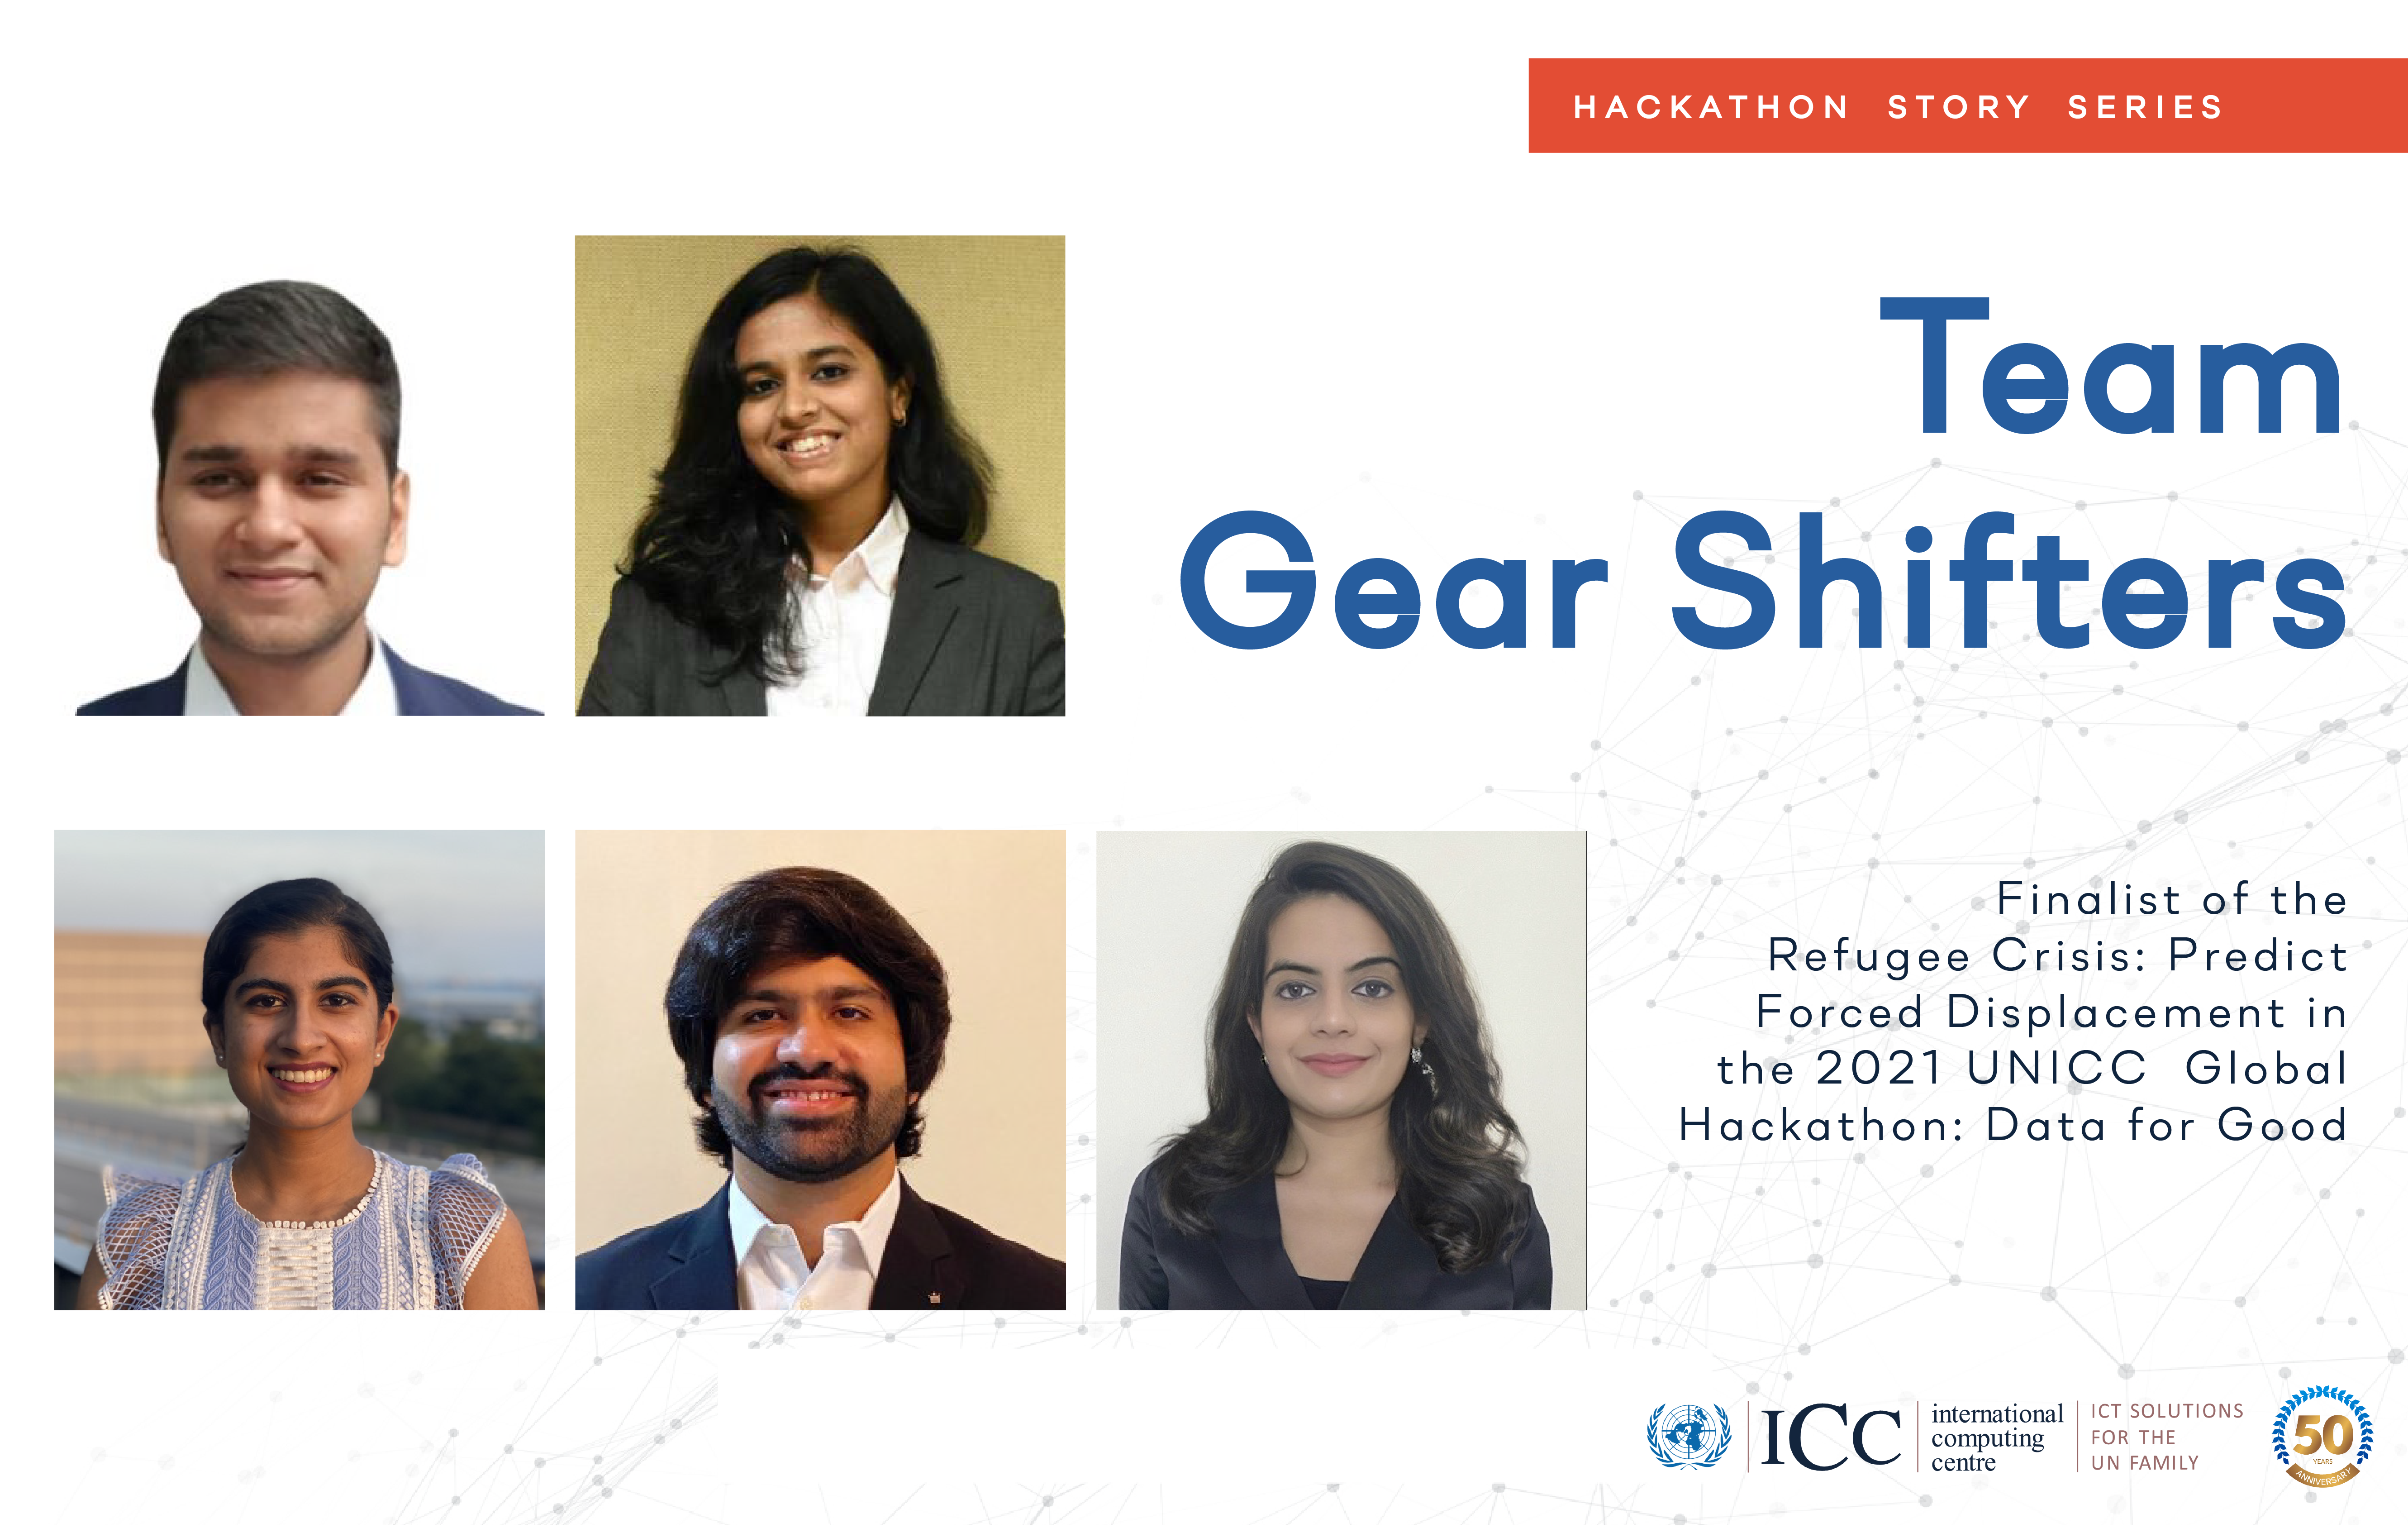 Getting into Gear: Team Gear Shifters of Columbia University Present as Finalists in UNICC Data for Good Hackathon